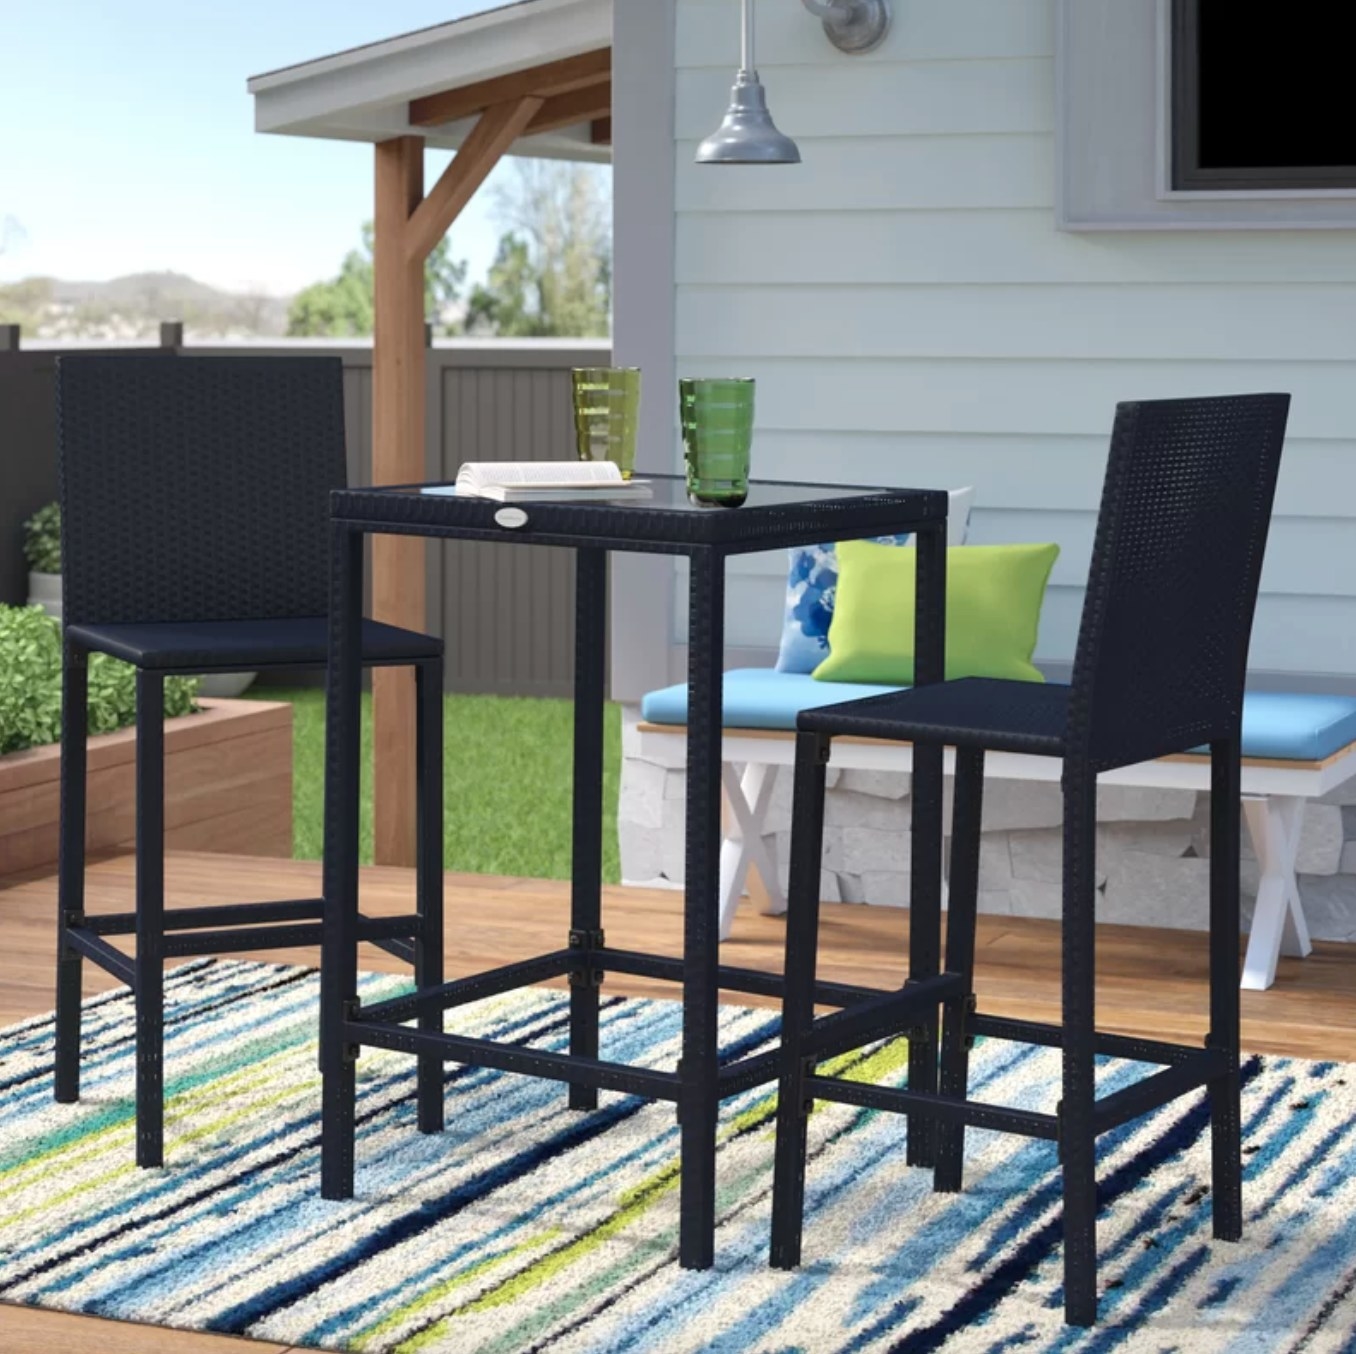 the black tall table and chairs on a striped rug in a decorated outdoor space